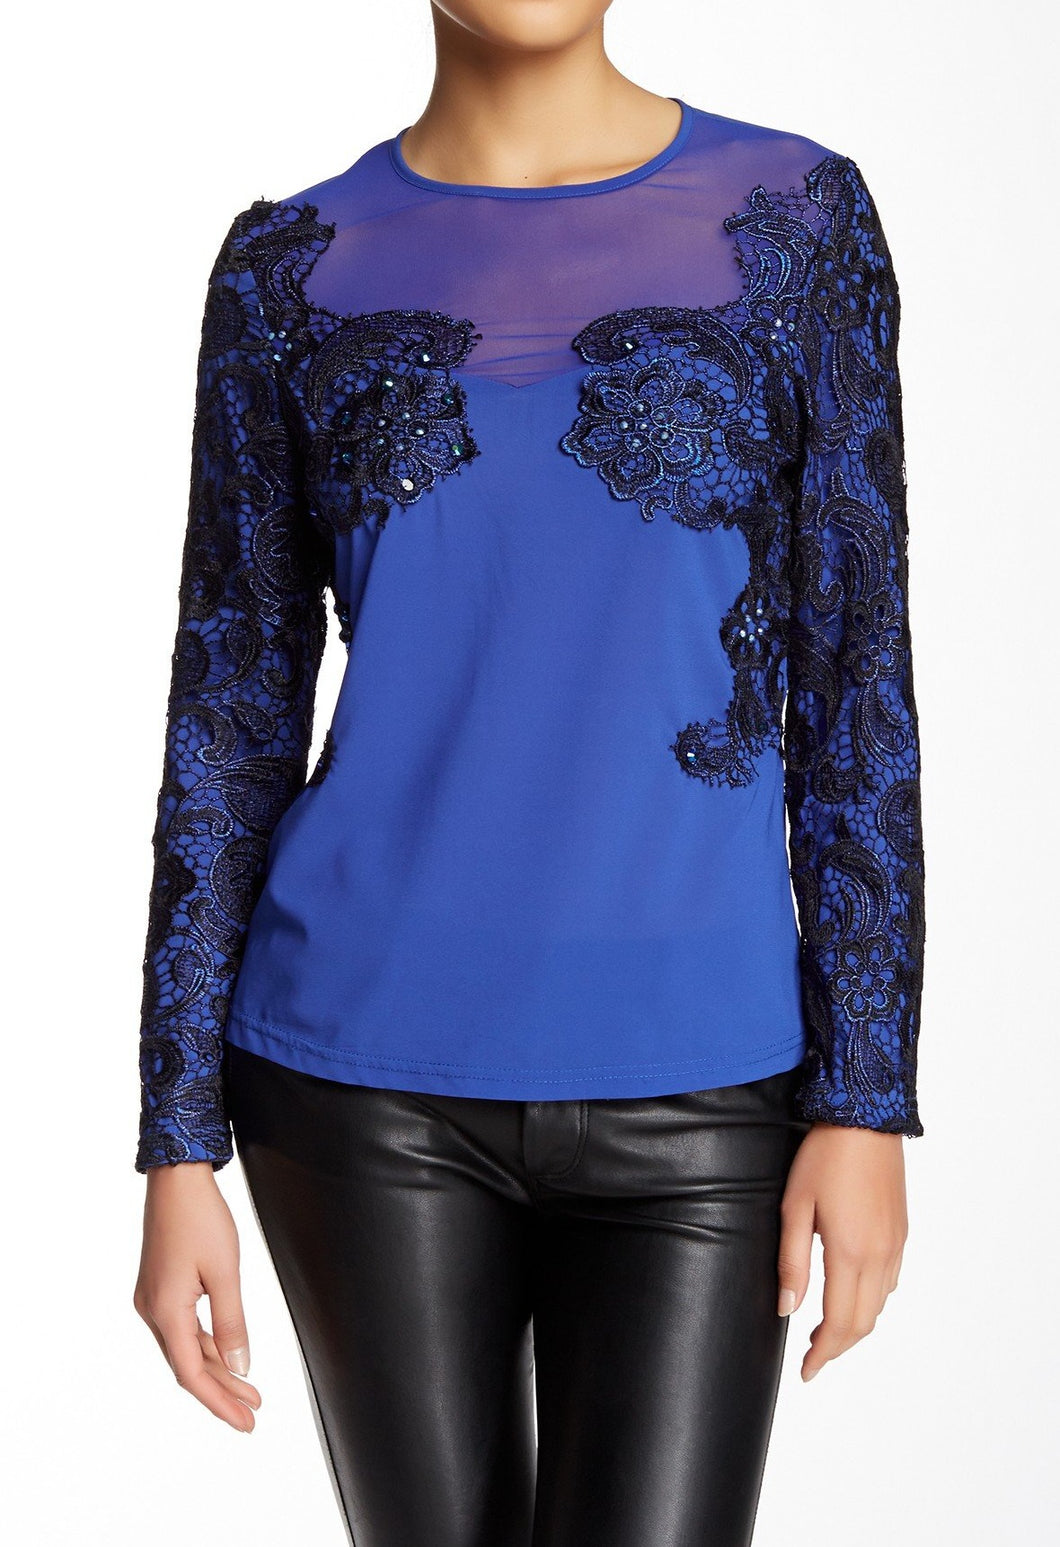 Lace and mesh add timeless character to this long sleeve blouse